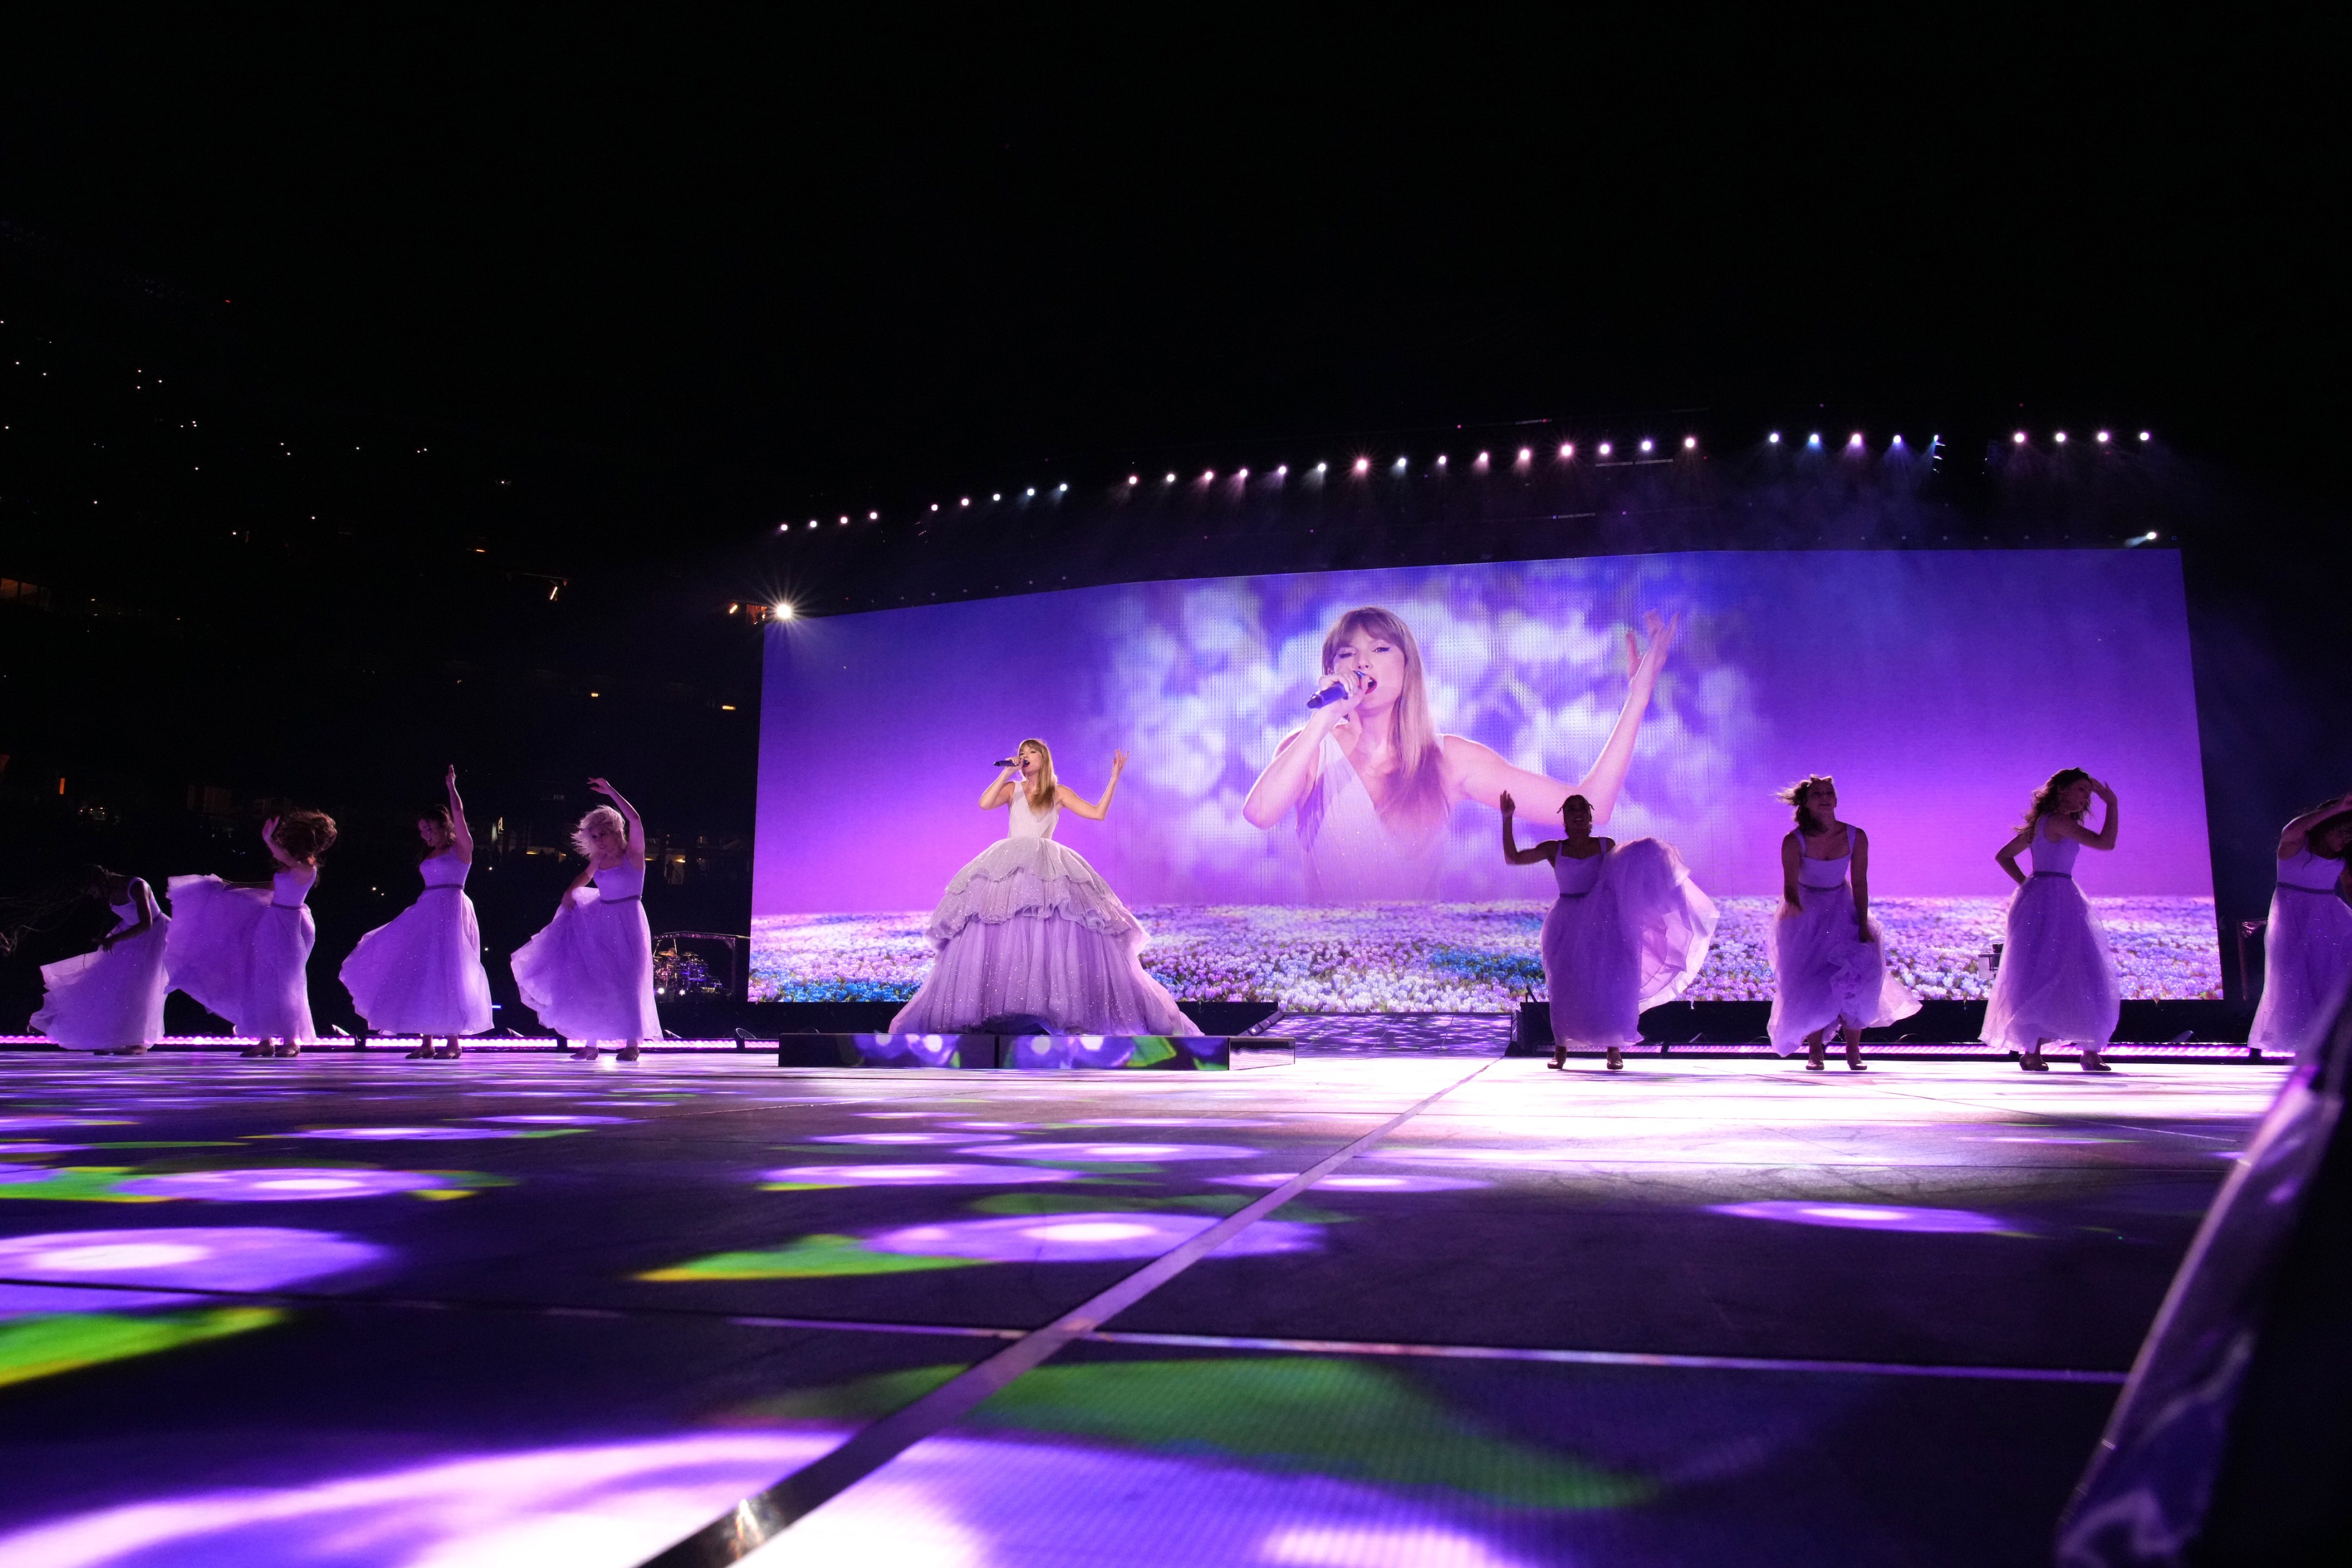 A singer on stage with dancers; a large screen showing the artist singing in a field.